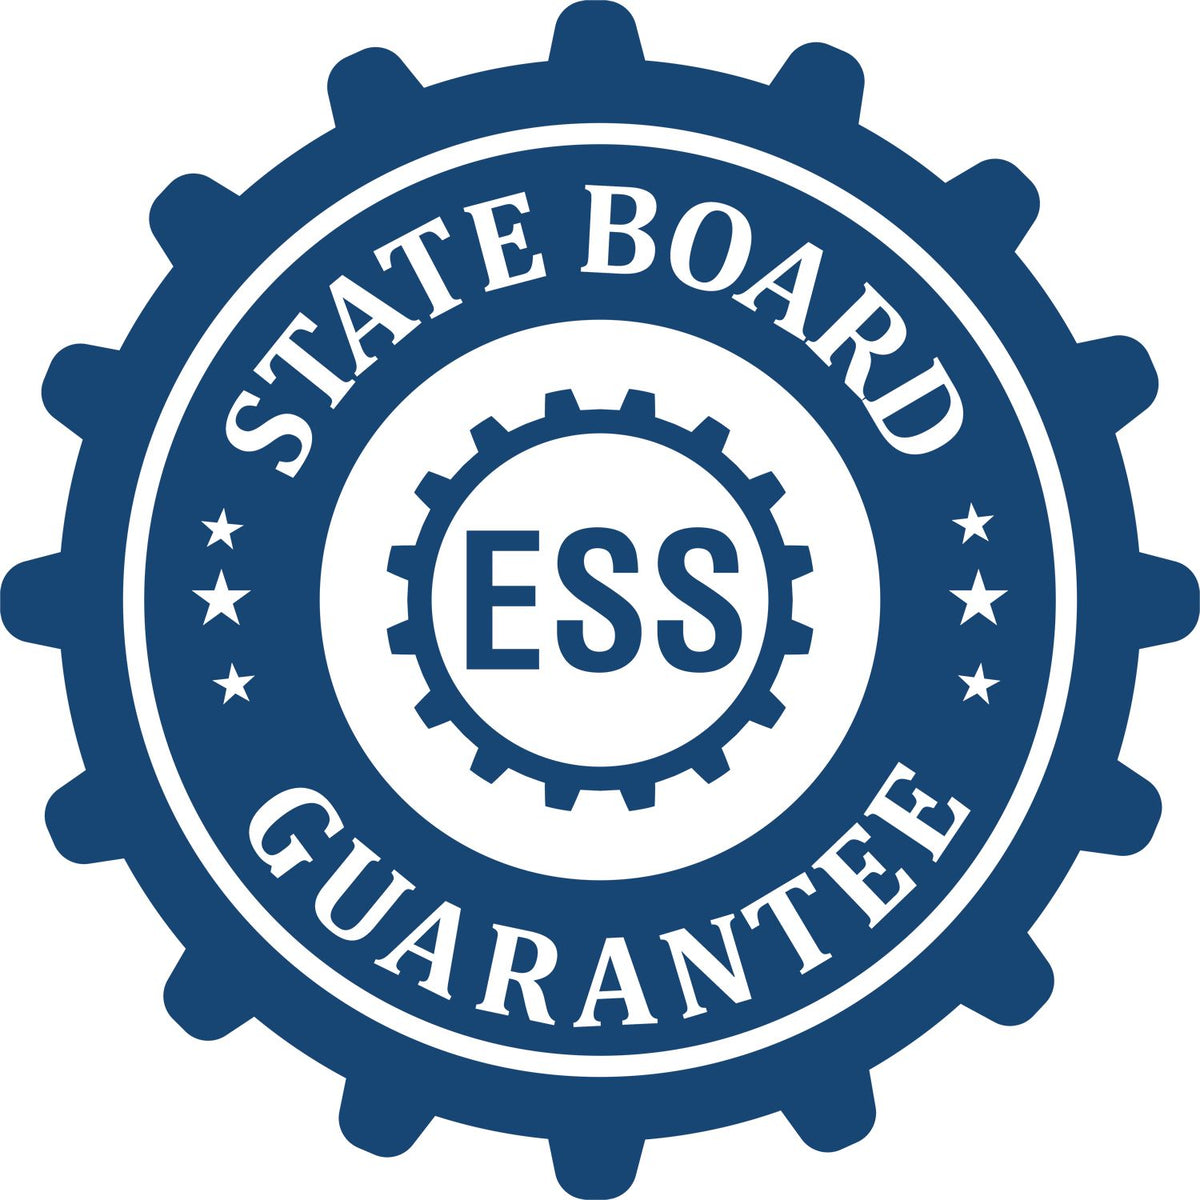 An emblem in a gear shape illustrating a state board guarantee for the Wisconsin Geologist Desk Seal